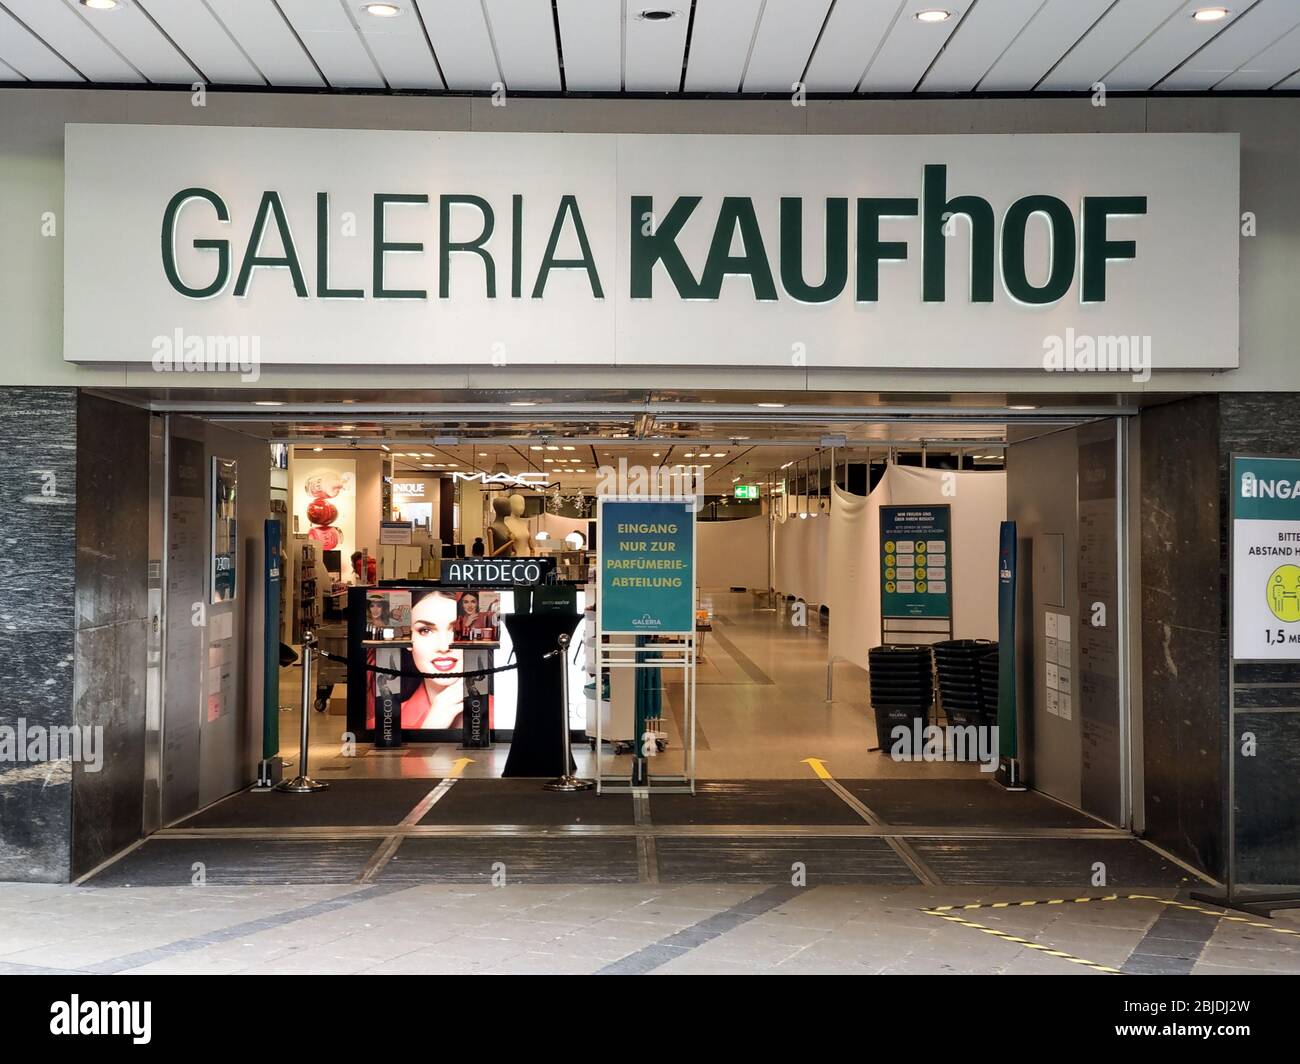 Galeria Kaufhof Munich High Resolution Stock Photography and Images - Alamy